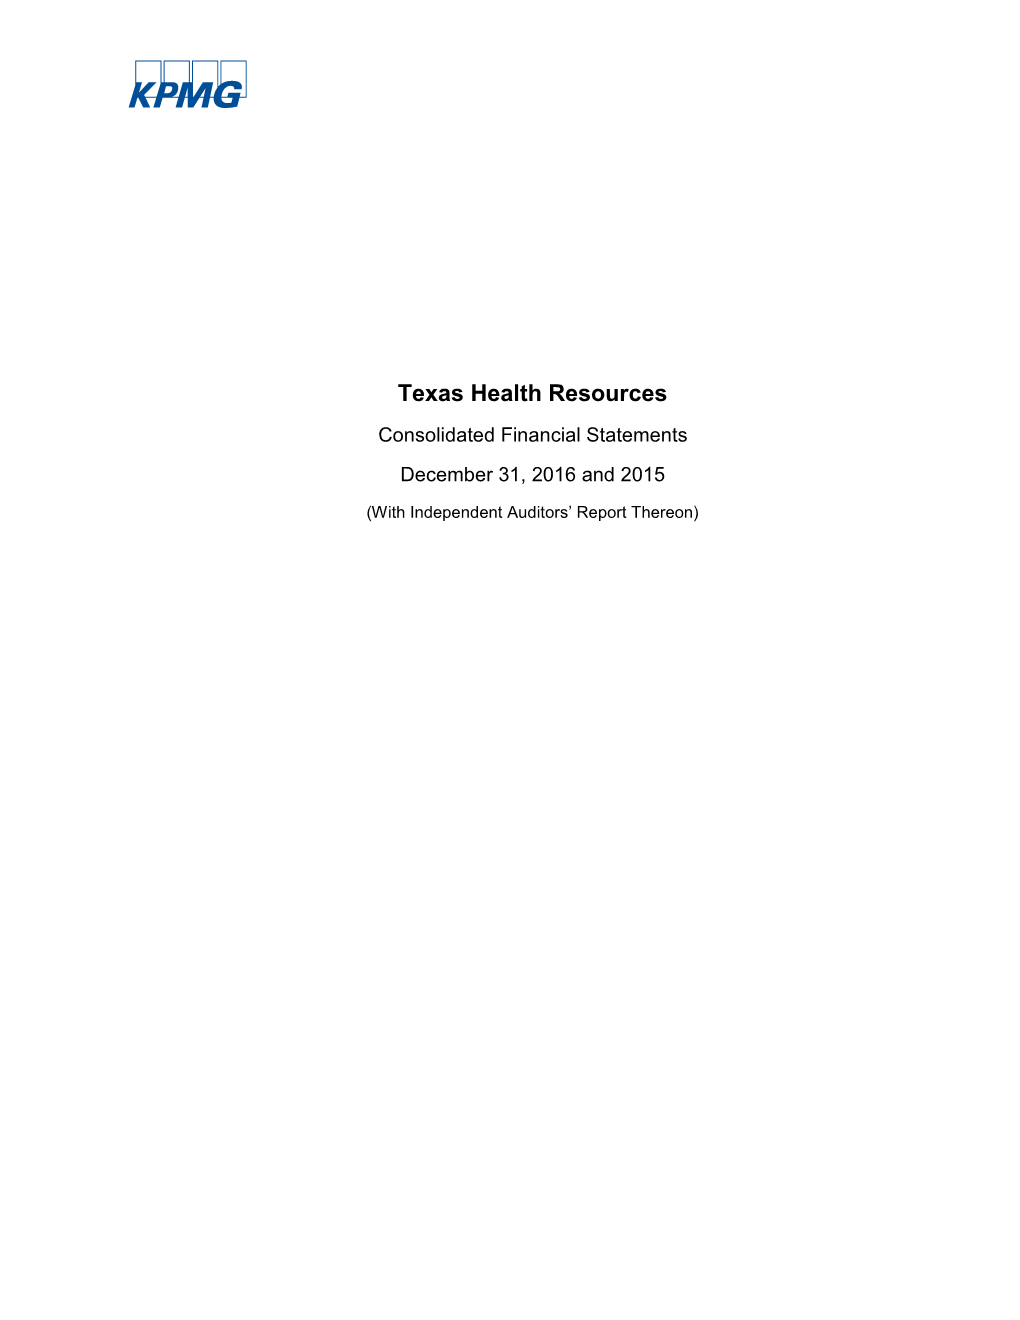 Texas Health Resources Consolidated Financial Statements December 31, 2016 and 2015